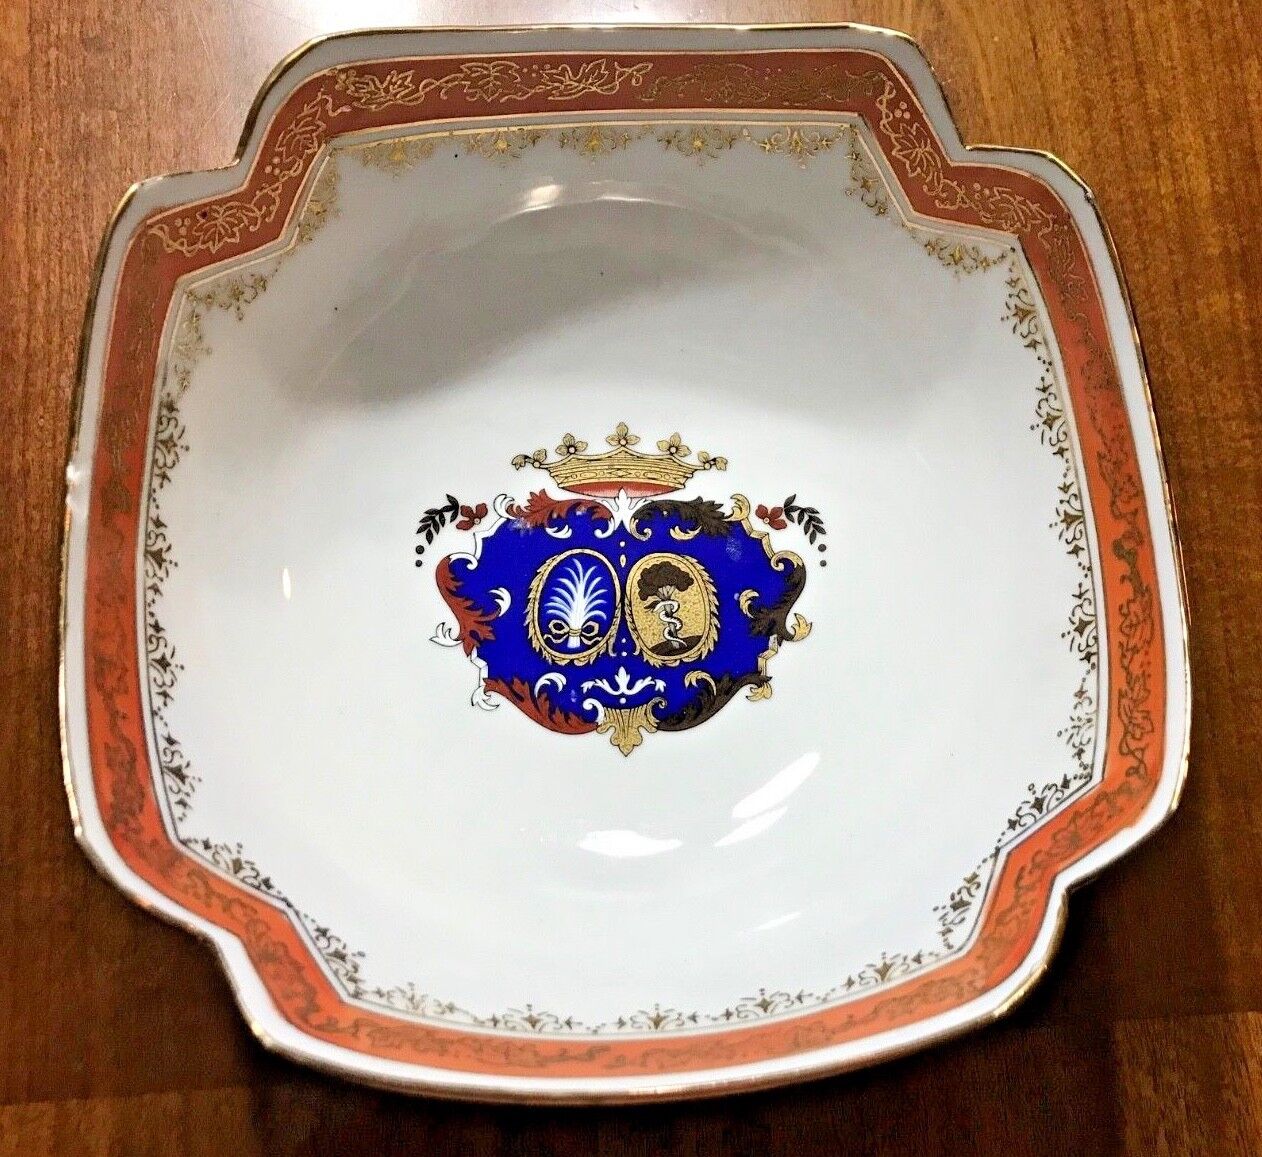 ATQ Bow Chelsea Derby Porcelain Royal Coat of Arms Bowl Vibrant Paint - Chipped